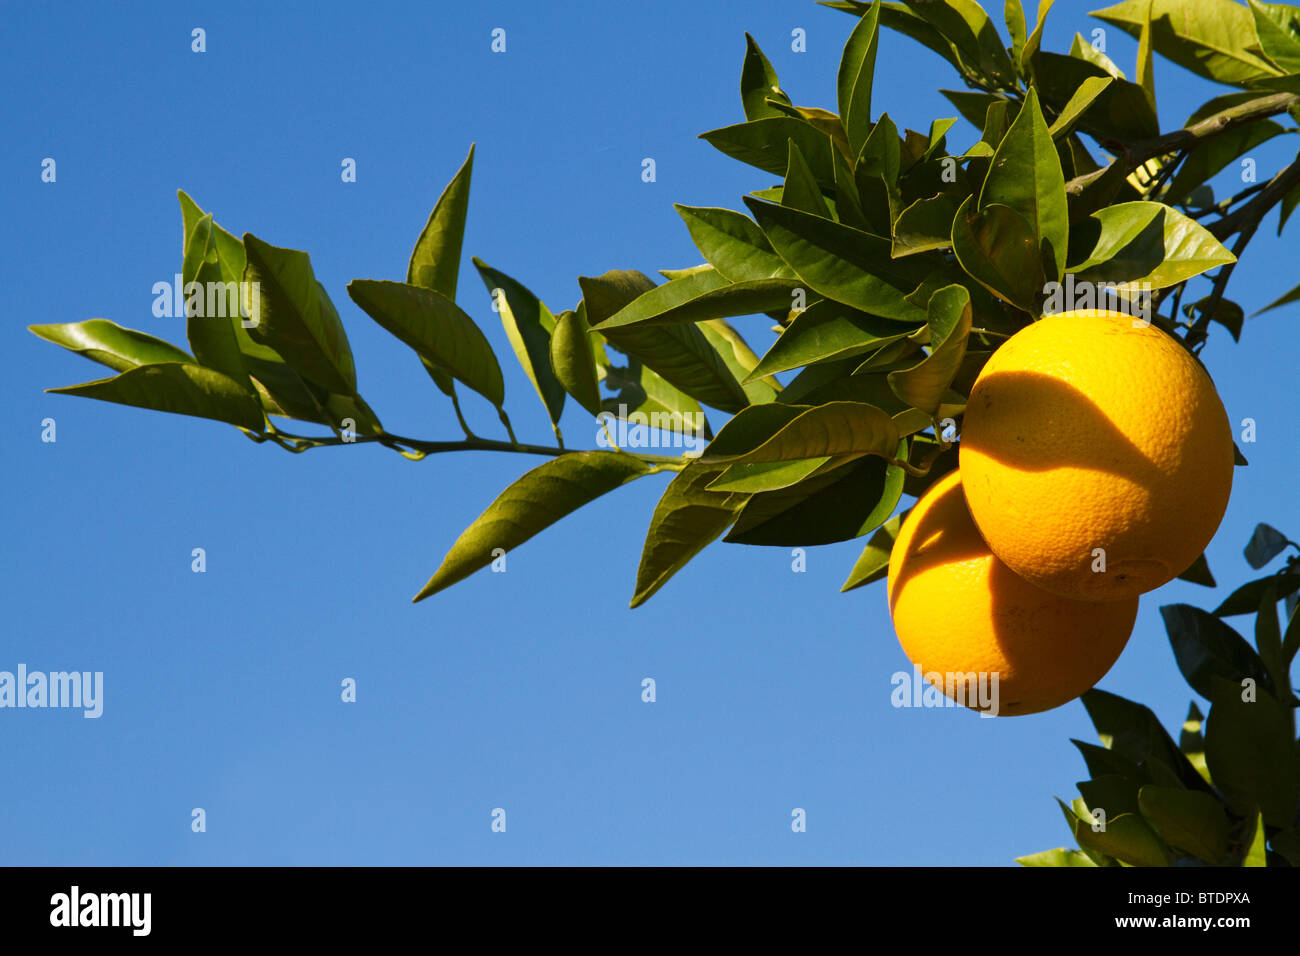 Oranges (Citrus sinensis) hanging from a branch Stock Photo